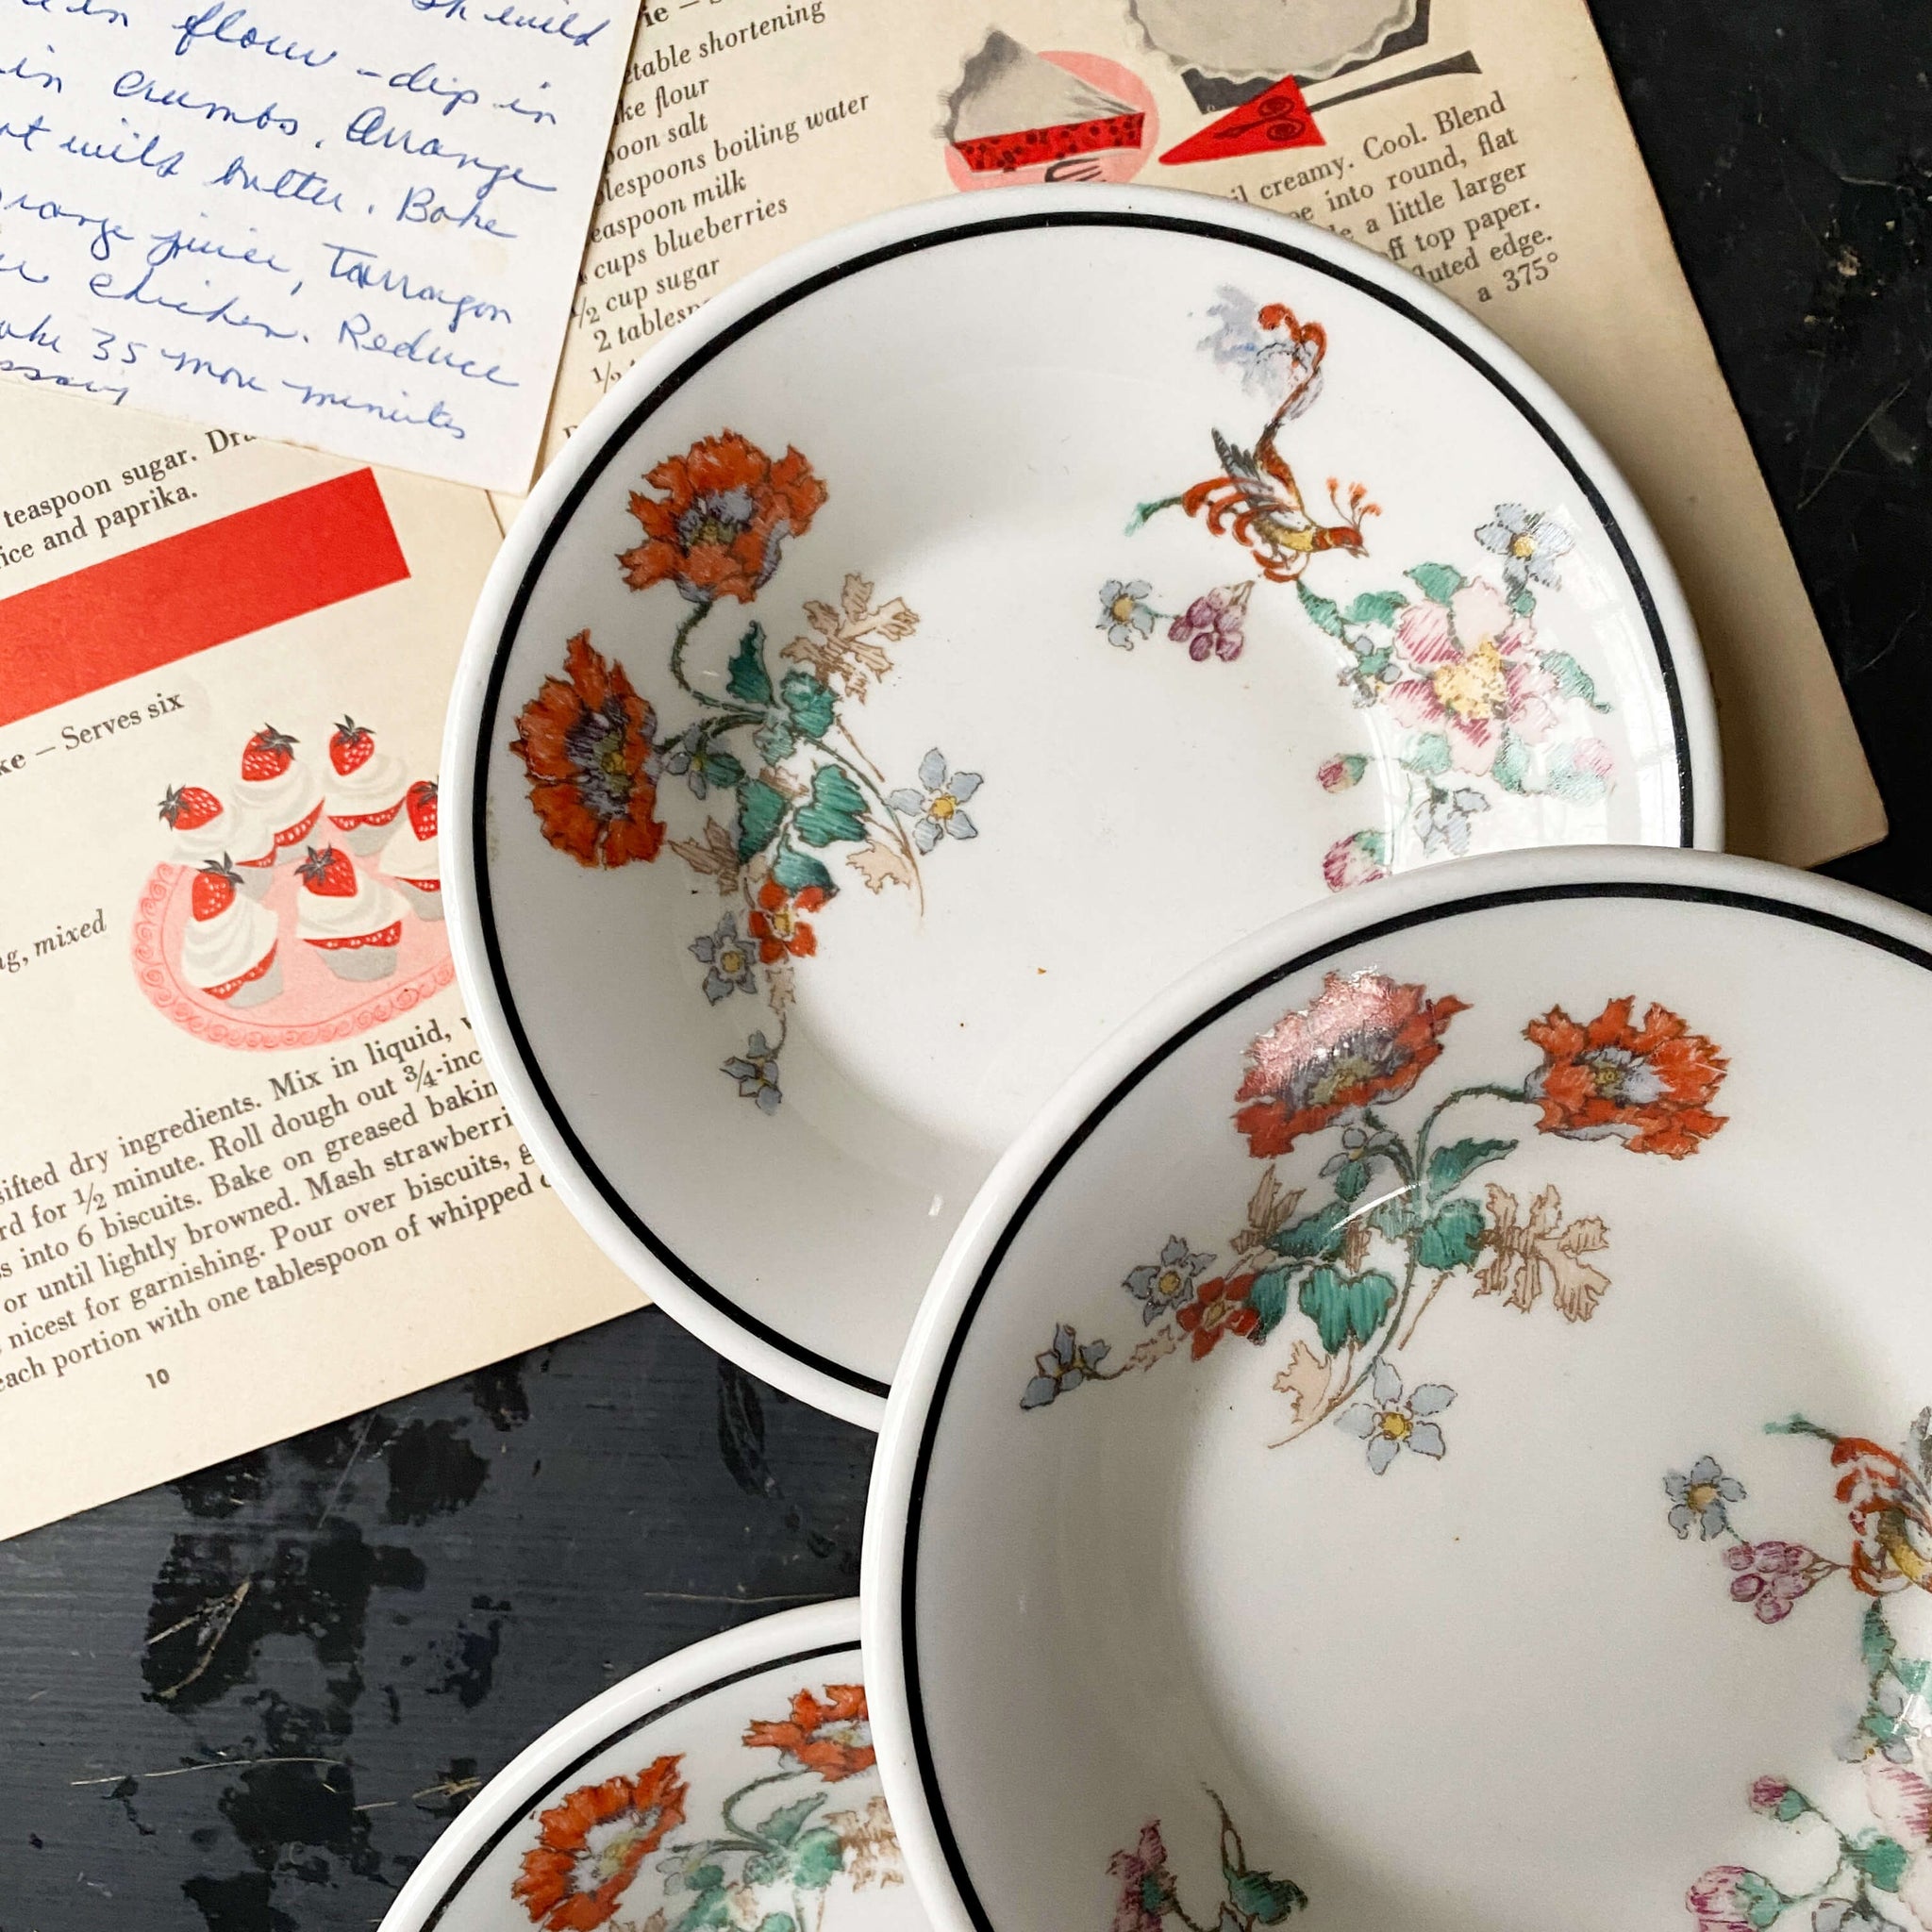 Vintage 1920s Handpainted Restaurant Ware Berry Bowls with Bird and Poppy Pattern